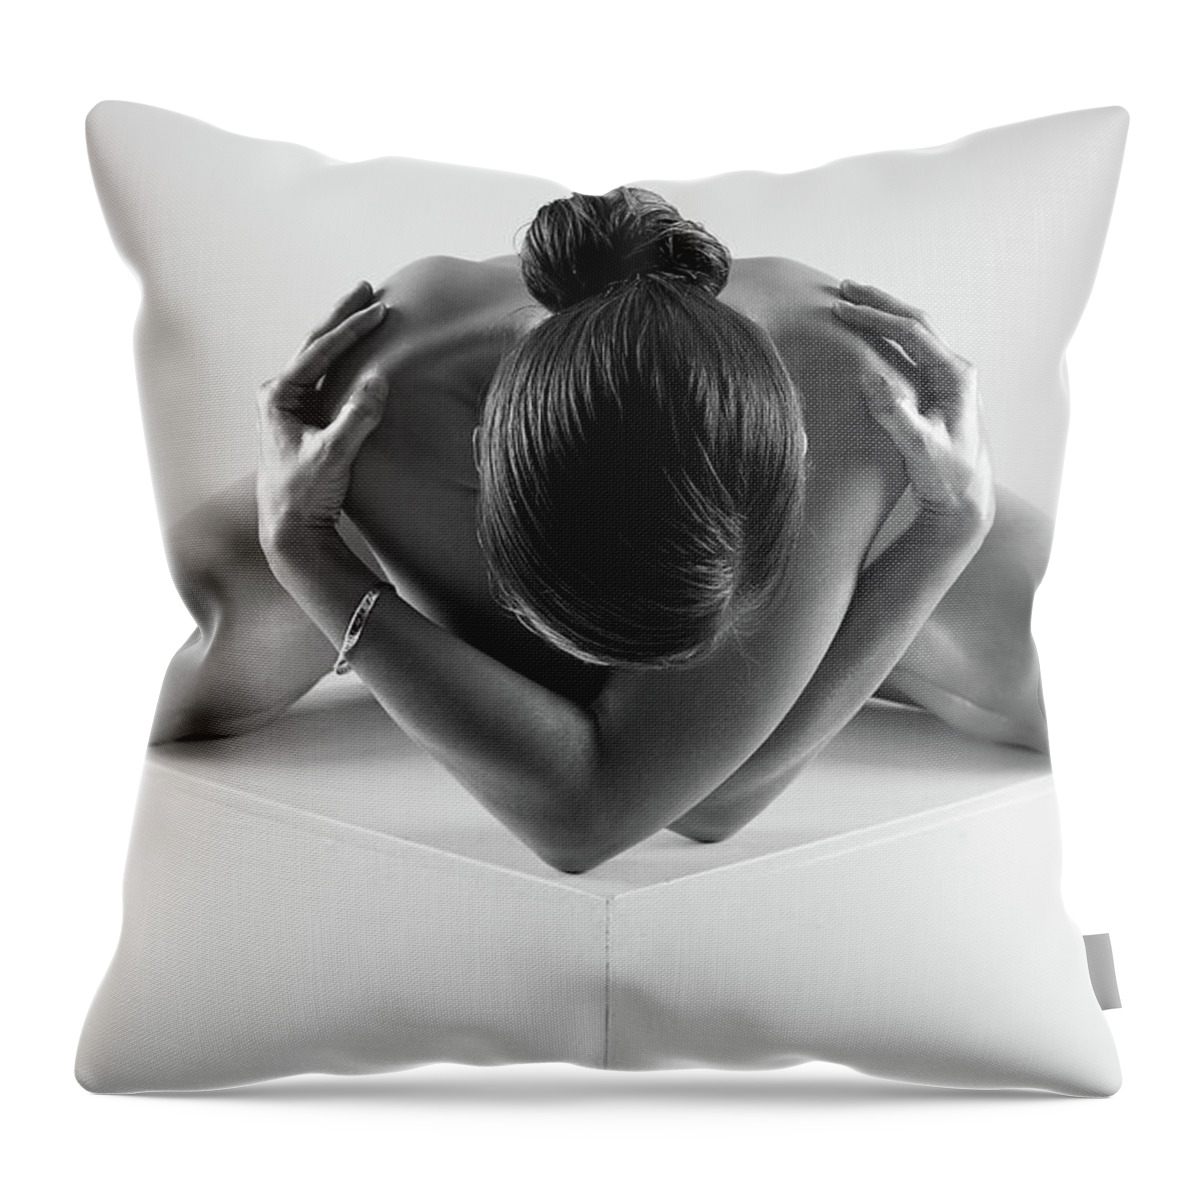 Art Nude Throw Pillow featuring the photograph Heart Full of Soul by Fon Denton